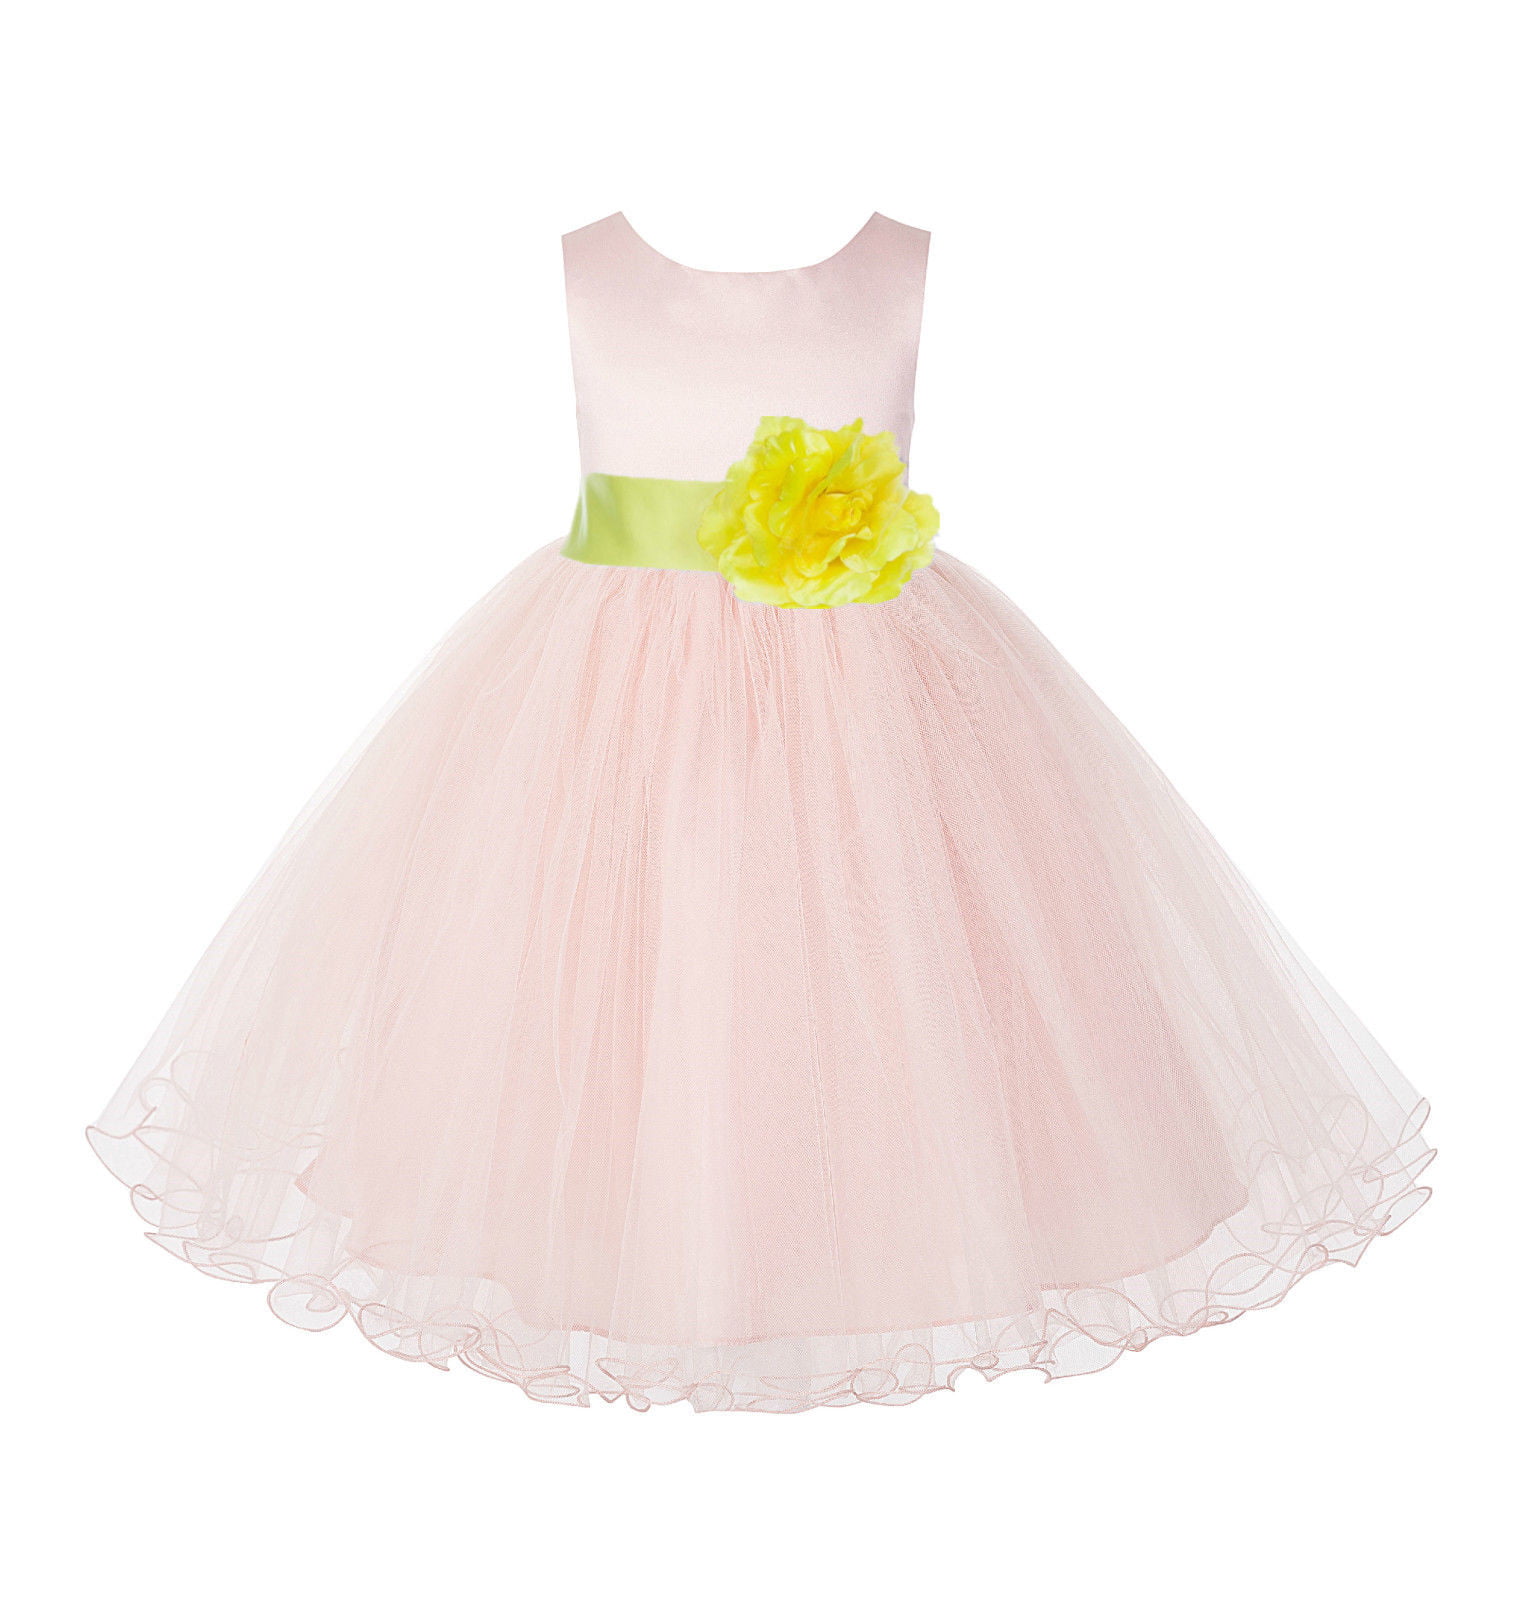 Details about   Biscotti Girls' Dress with Puff Sleeves Sizes 12M-4 